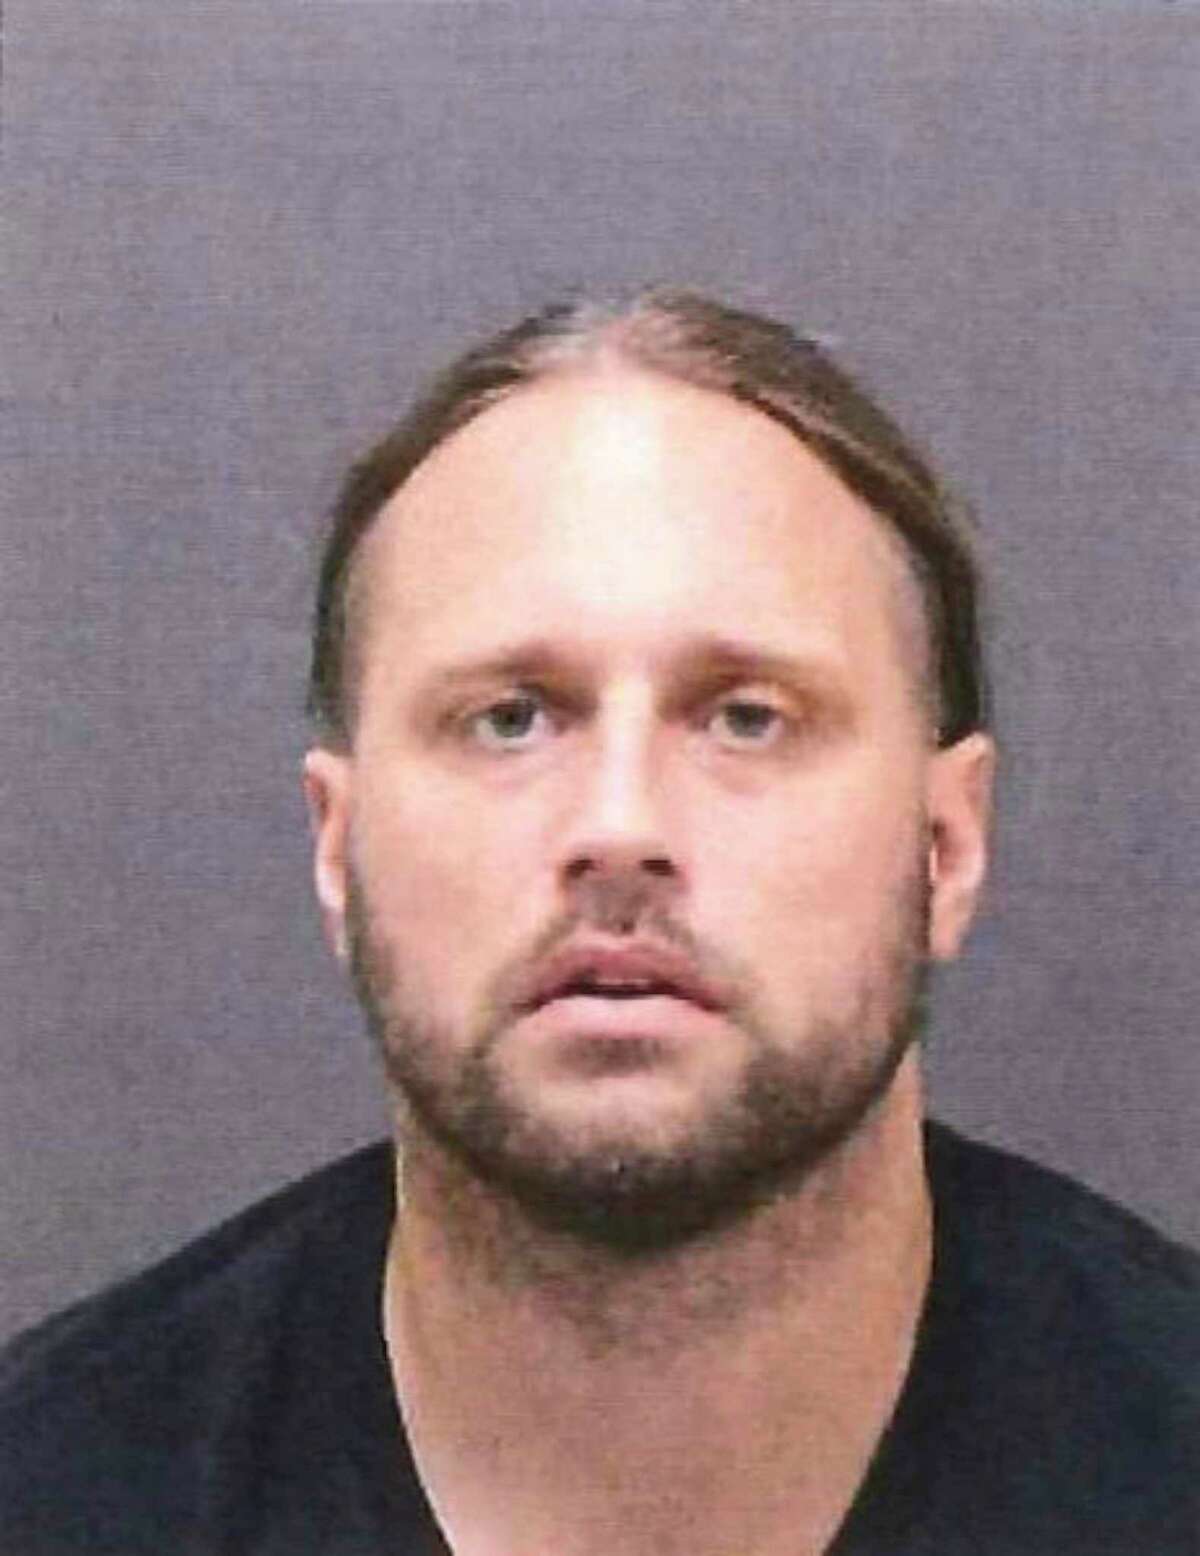 Connecticut State Police arrested Aaron Bouffard, of Bristol, in connection with the investigation into an officer involved shooting that occurred on July 3, 2019 in Danbury, Conn.